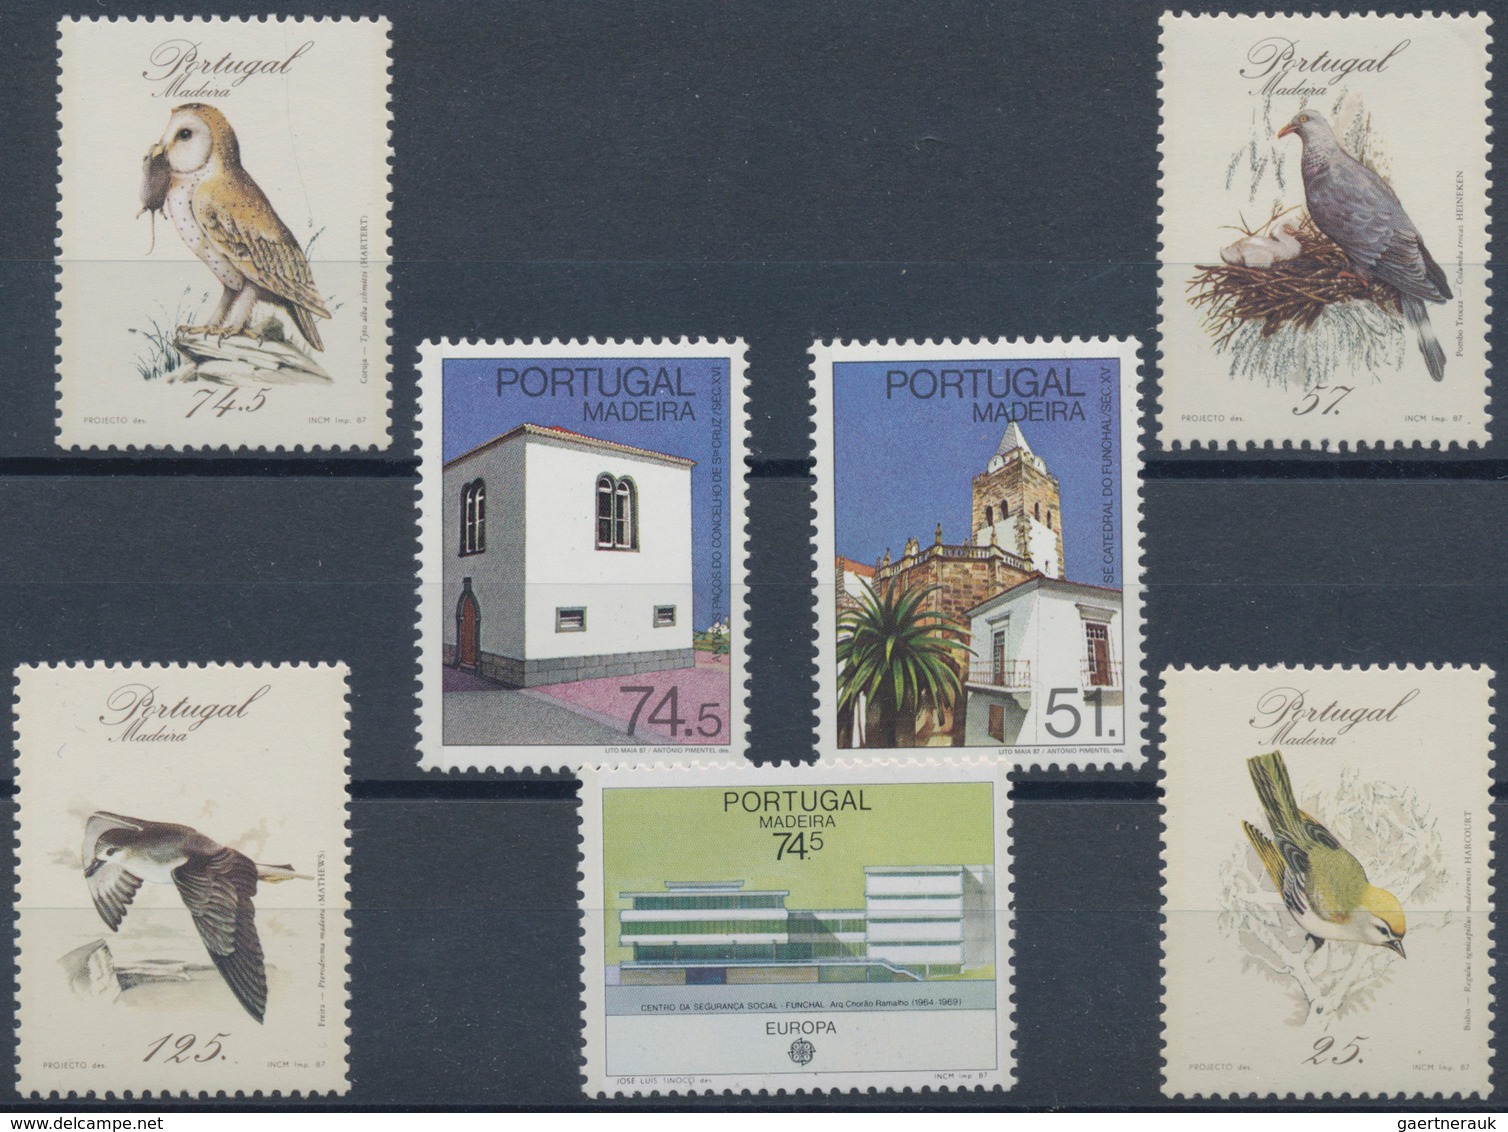 Portugal - Madeira: 1980/1999, dealer's stock of year sets on stockcards, seald in plastic sleeves w